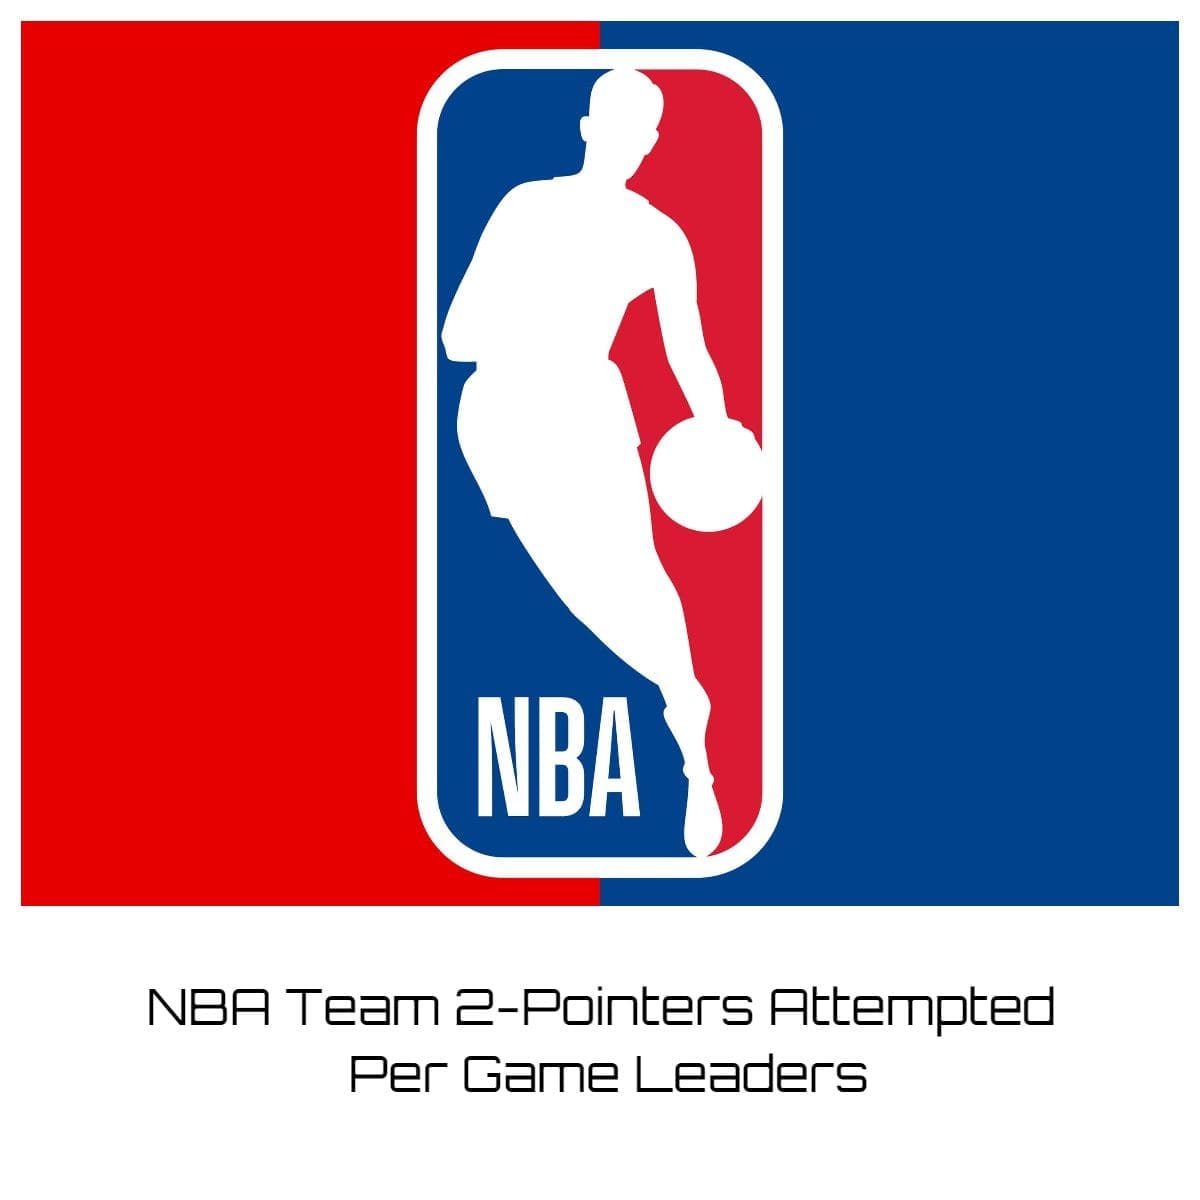 NBA Team 2-Pointers Attempted Per Game Leaders